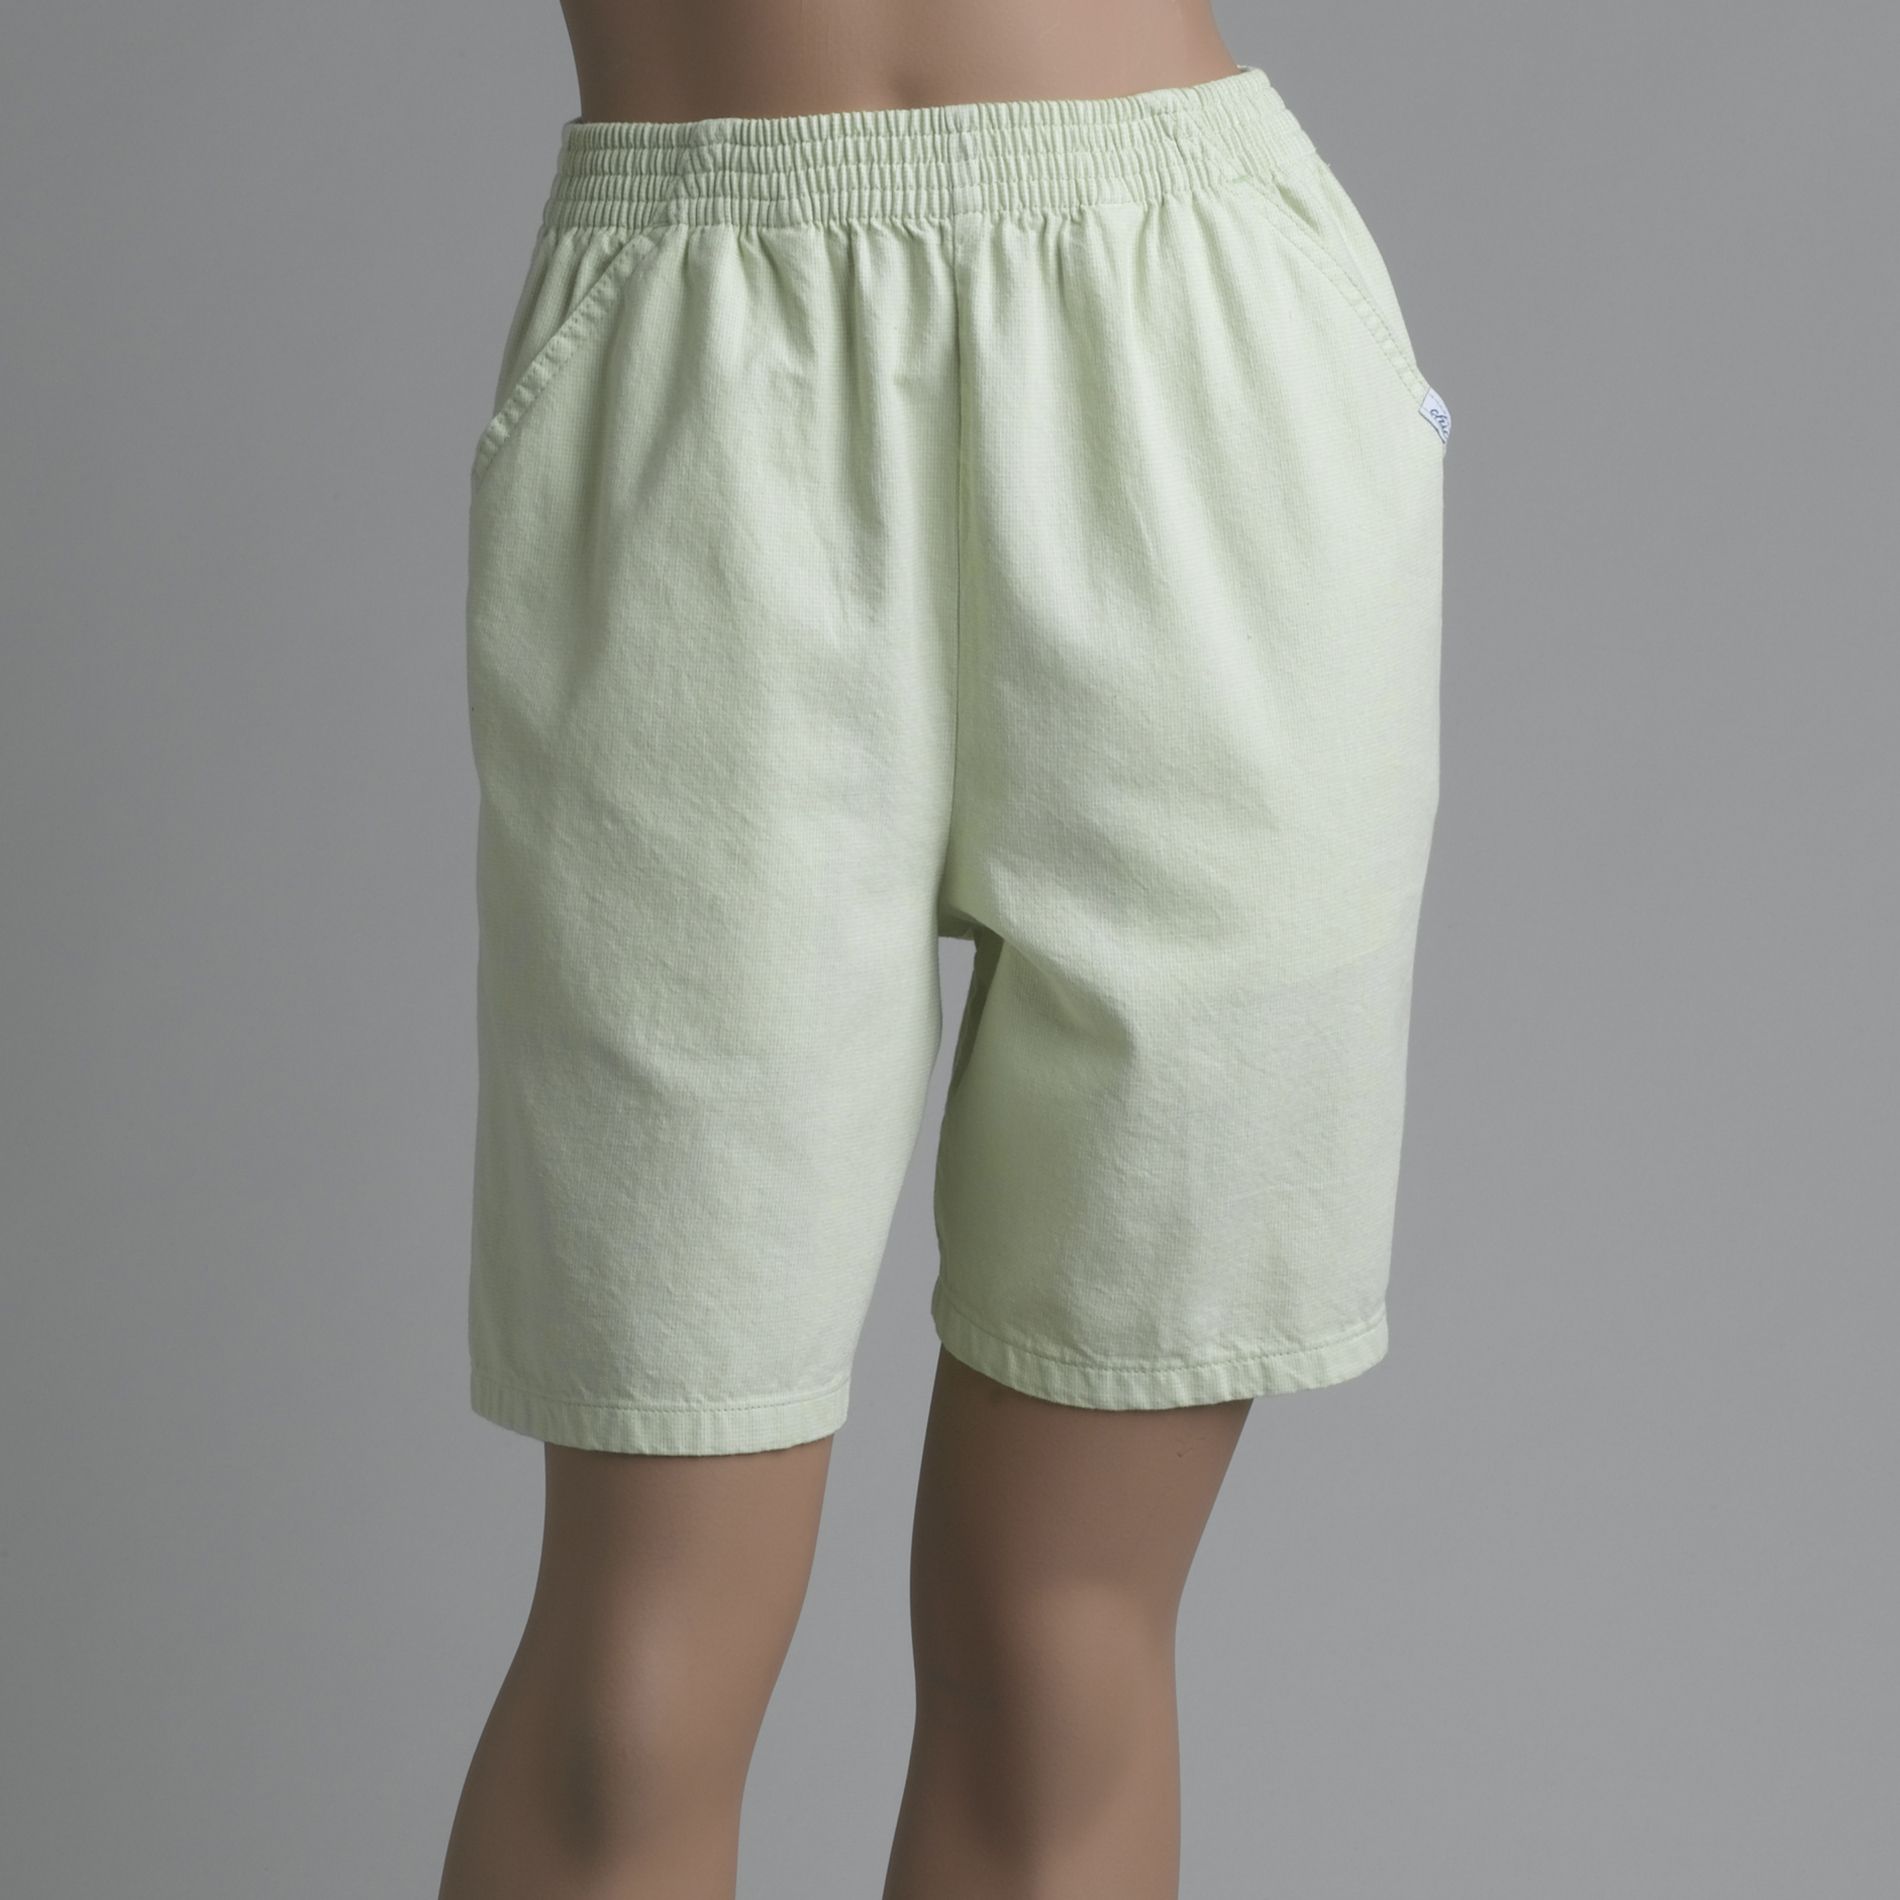 Chic Women's Scooter Shorts